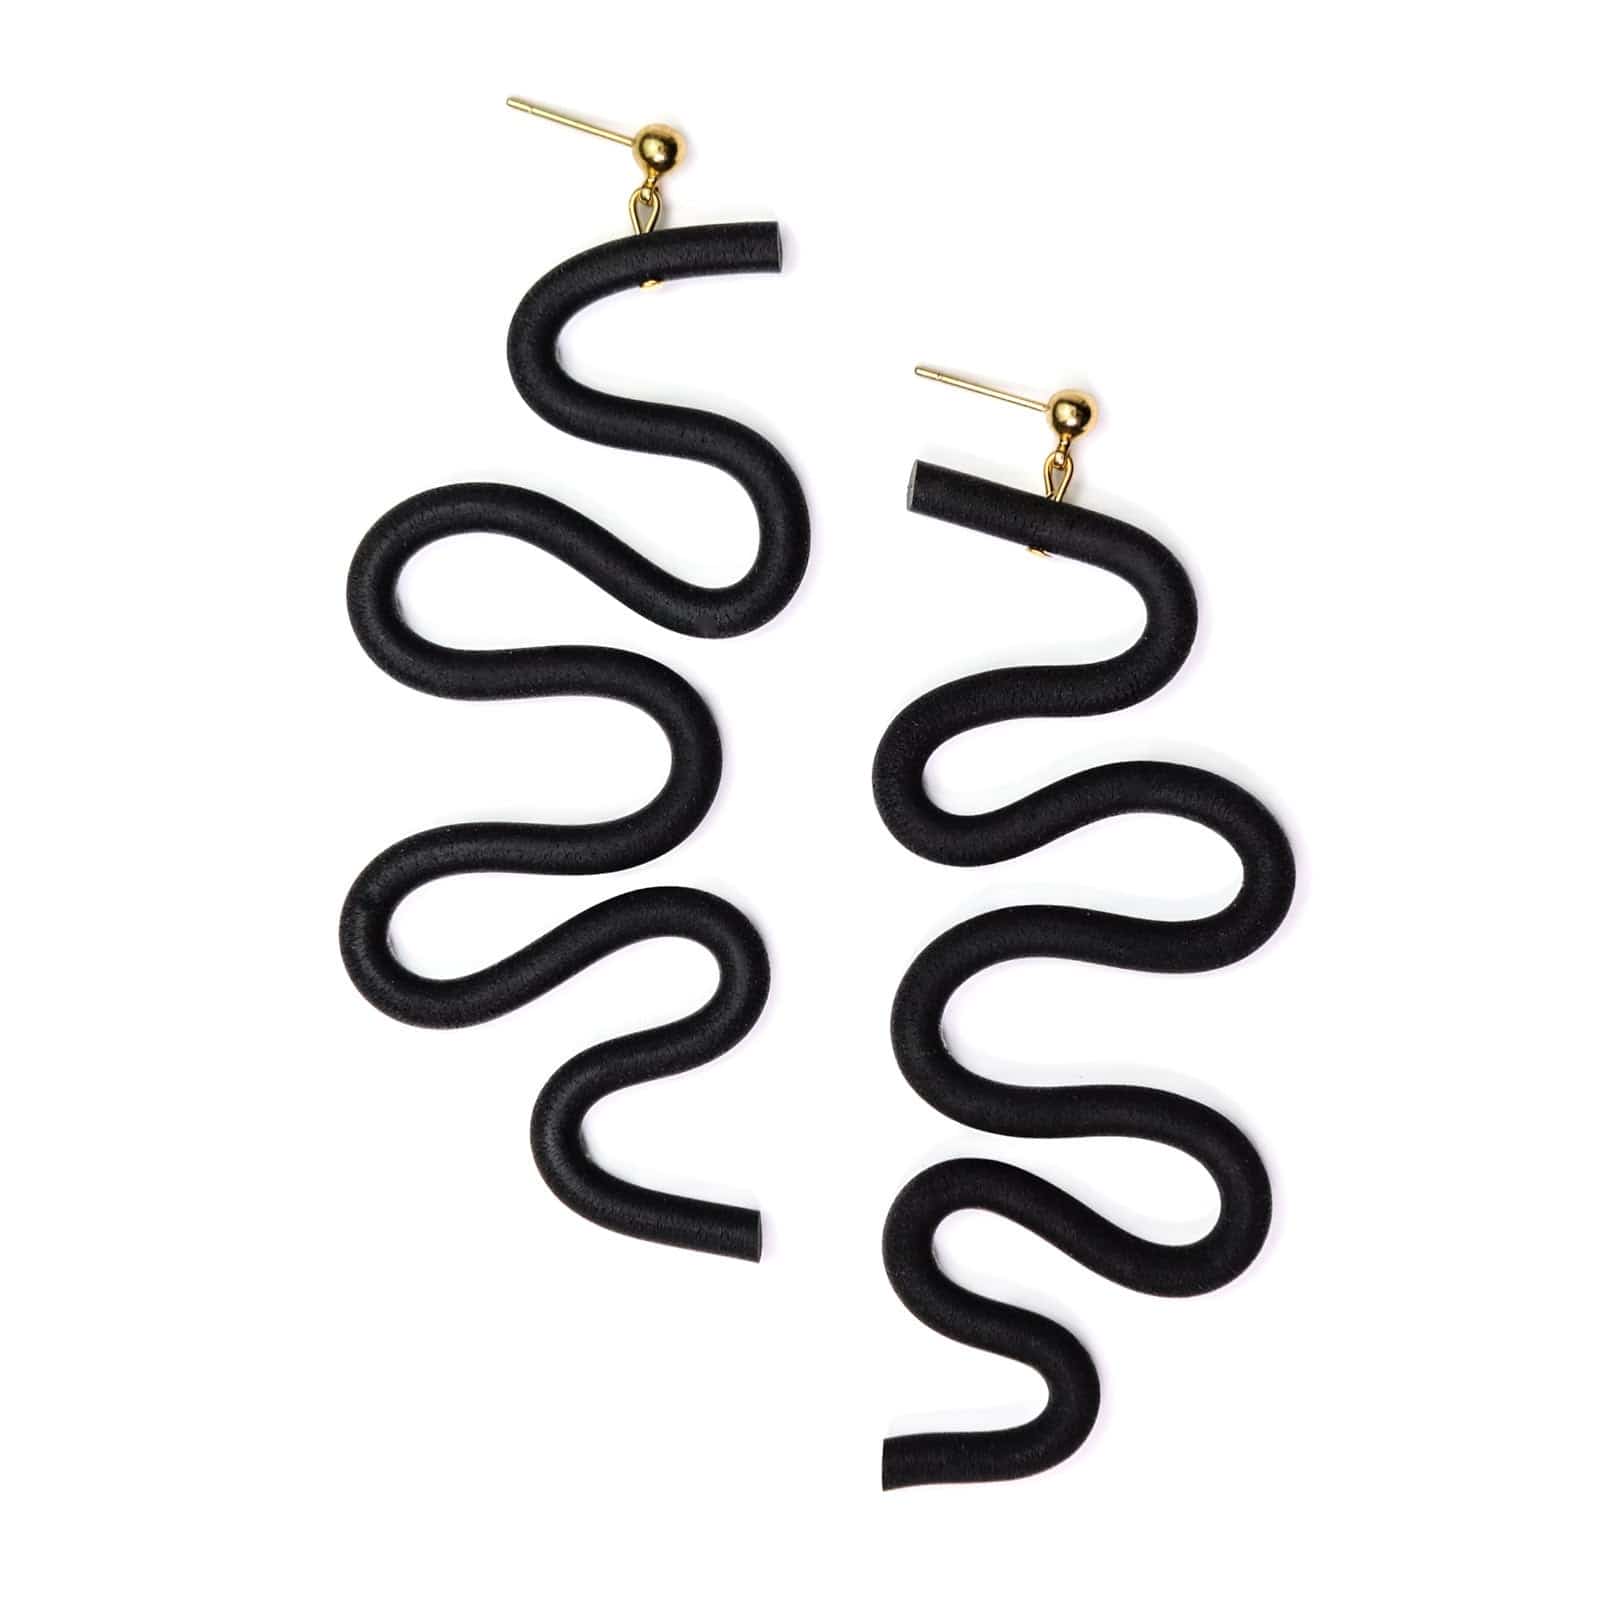 By Chavelli Women's Small Tube Squiggles Dangly Earrings In Black